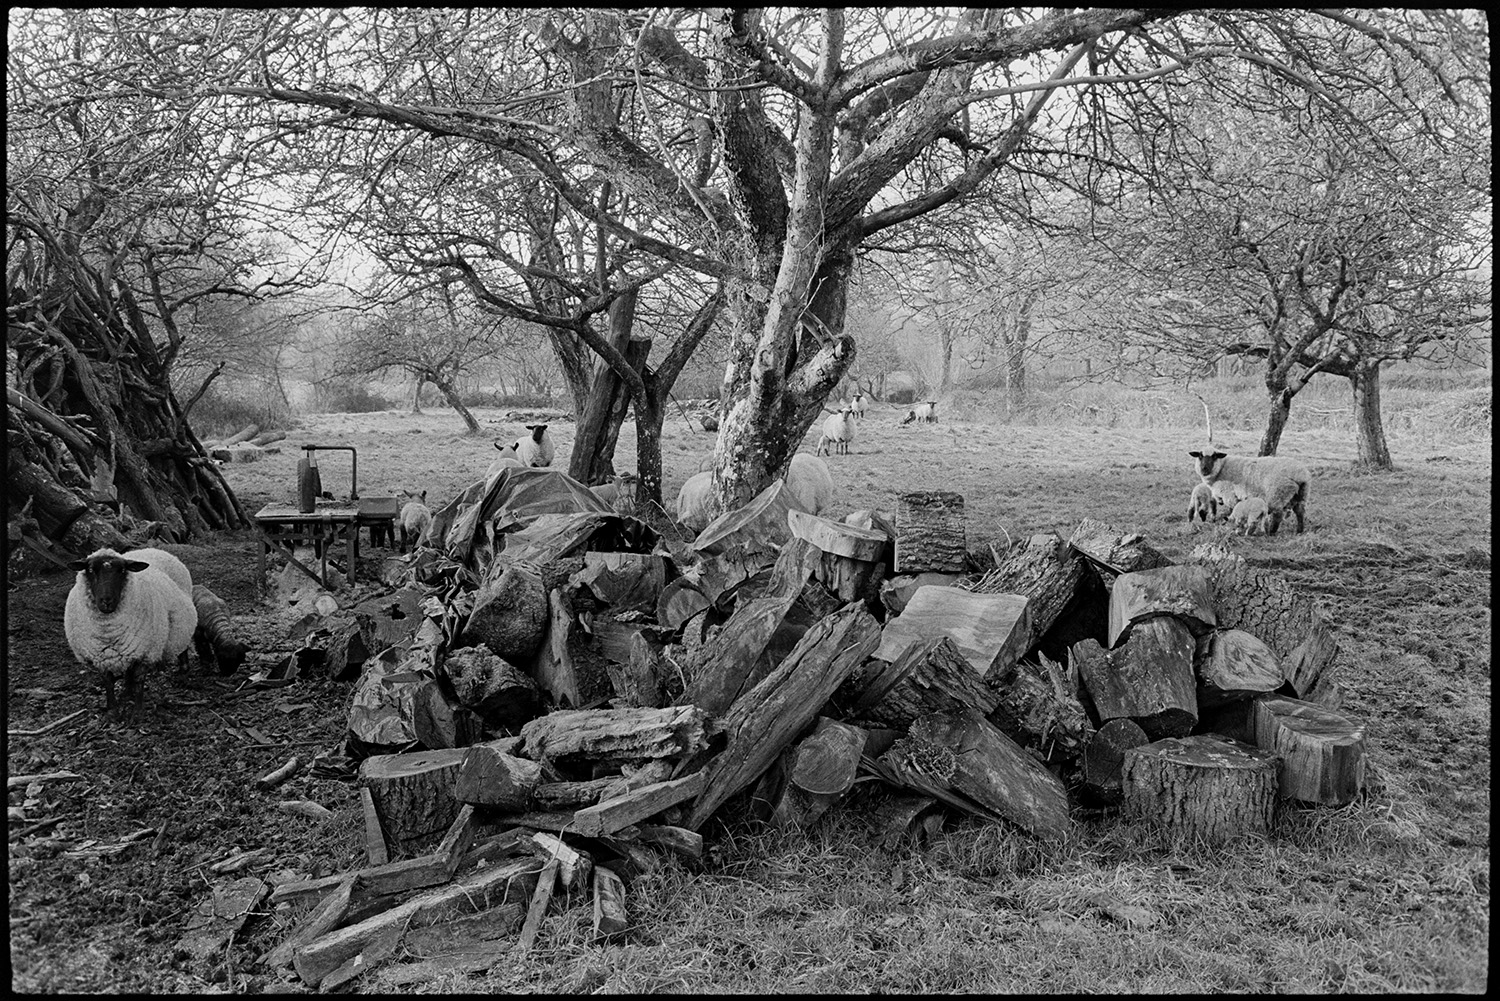 Sheep in orchard with logs and woodpile, farmer feeding sheep.
[Sheep and lambs, with a large pile of logs and circular saw, in an apple orchard at Middle Week near Iddesleigh.]